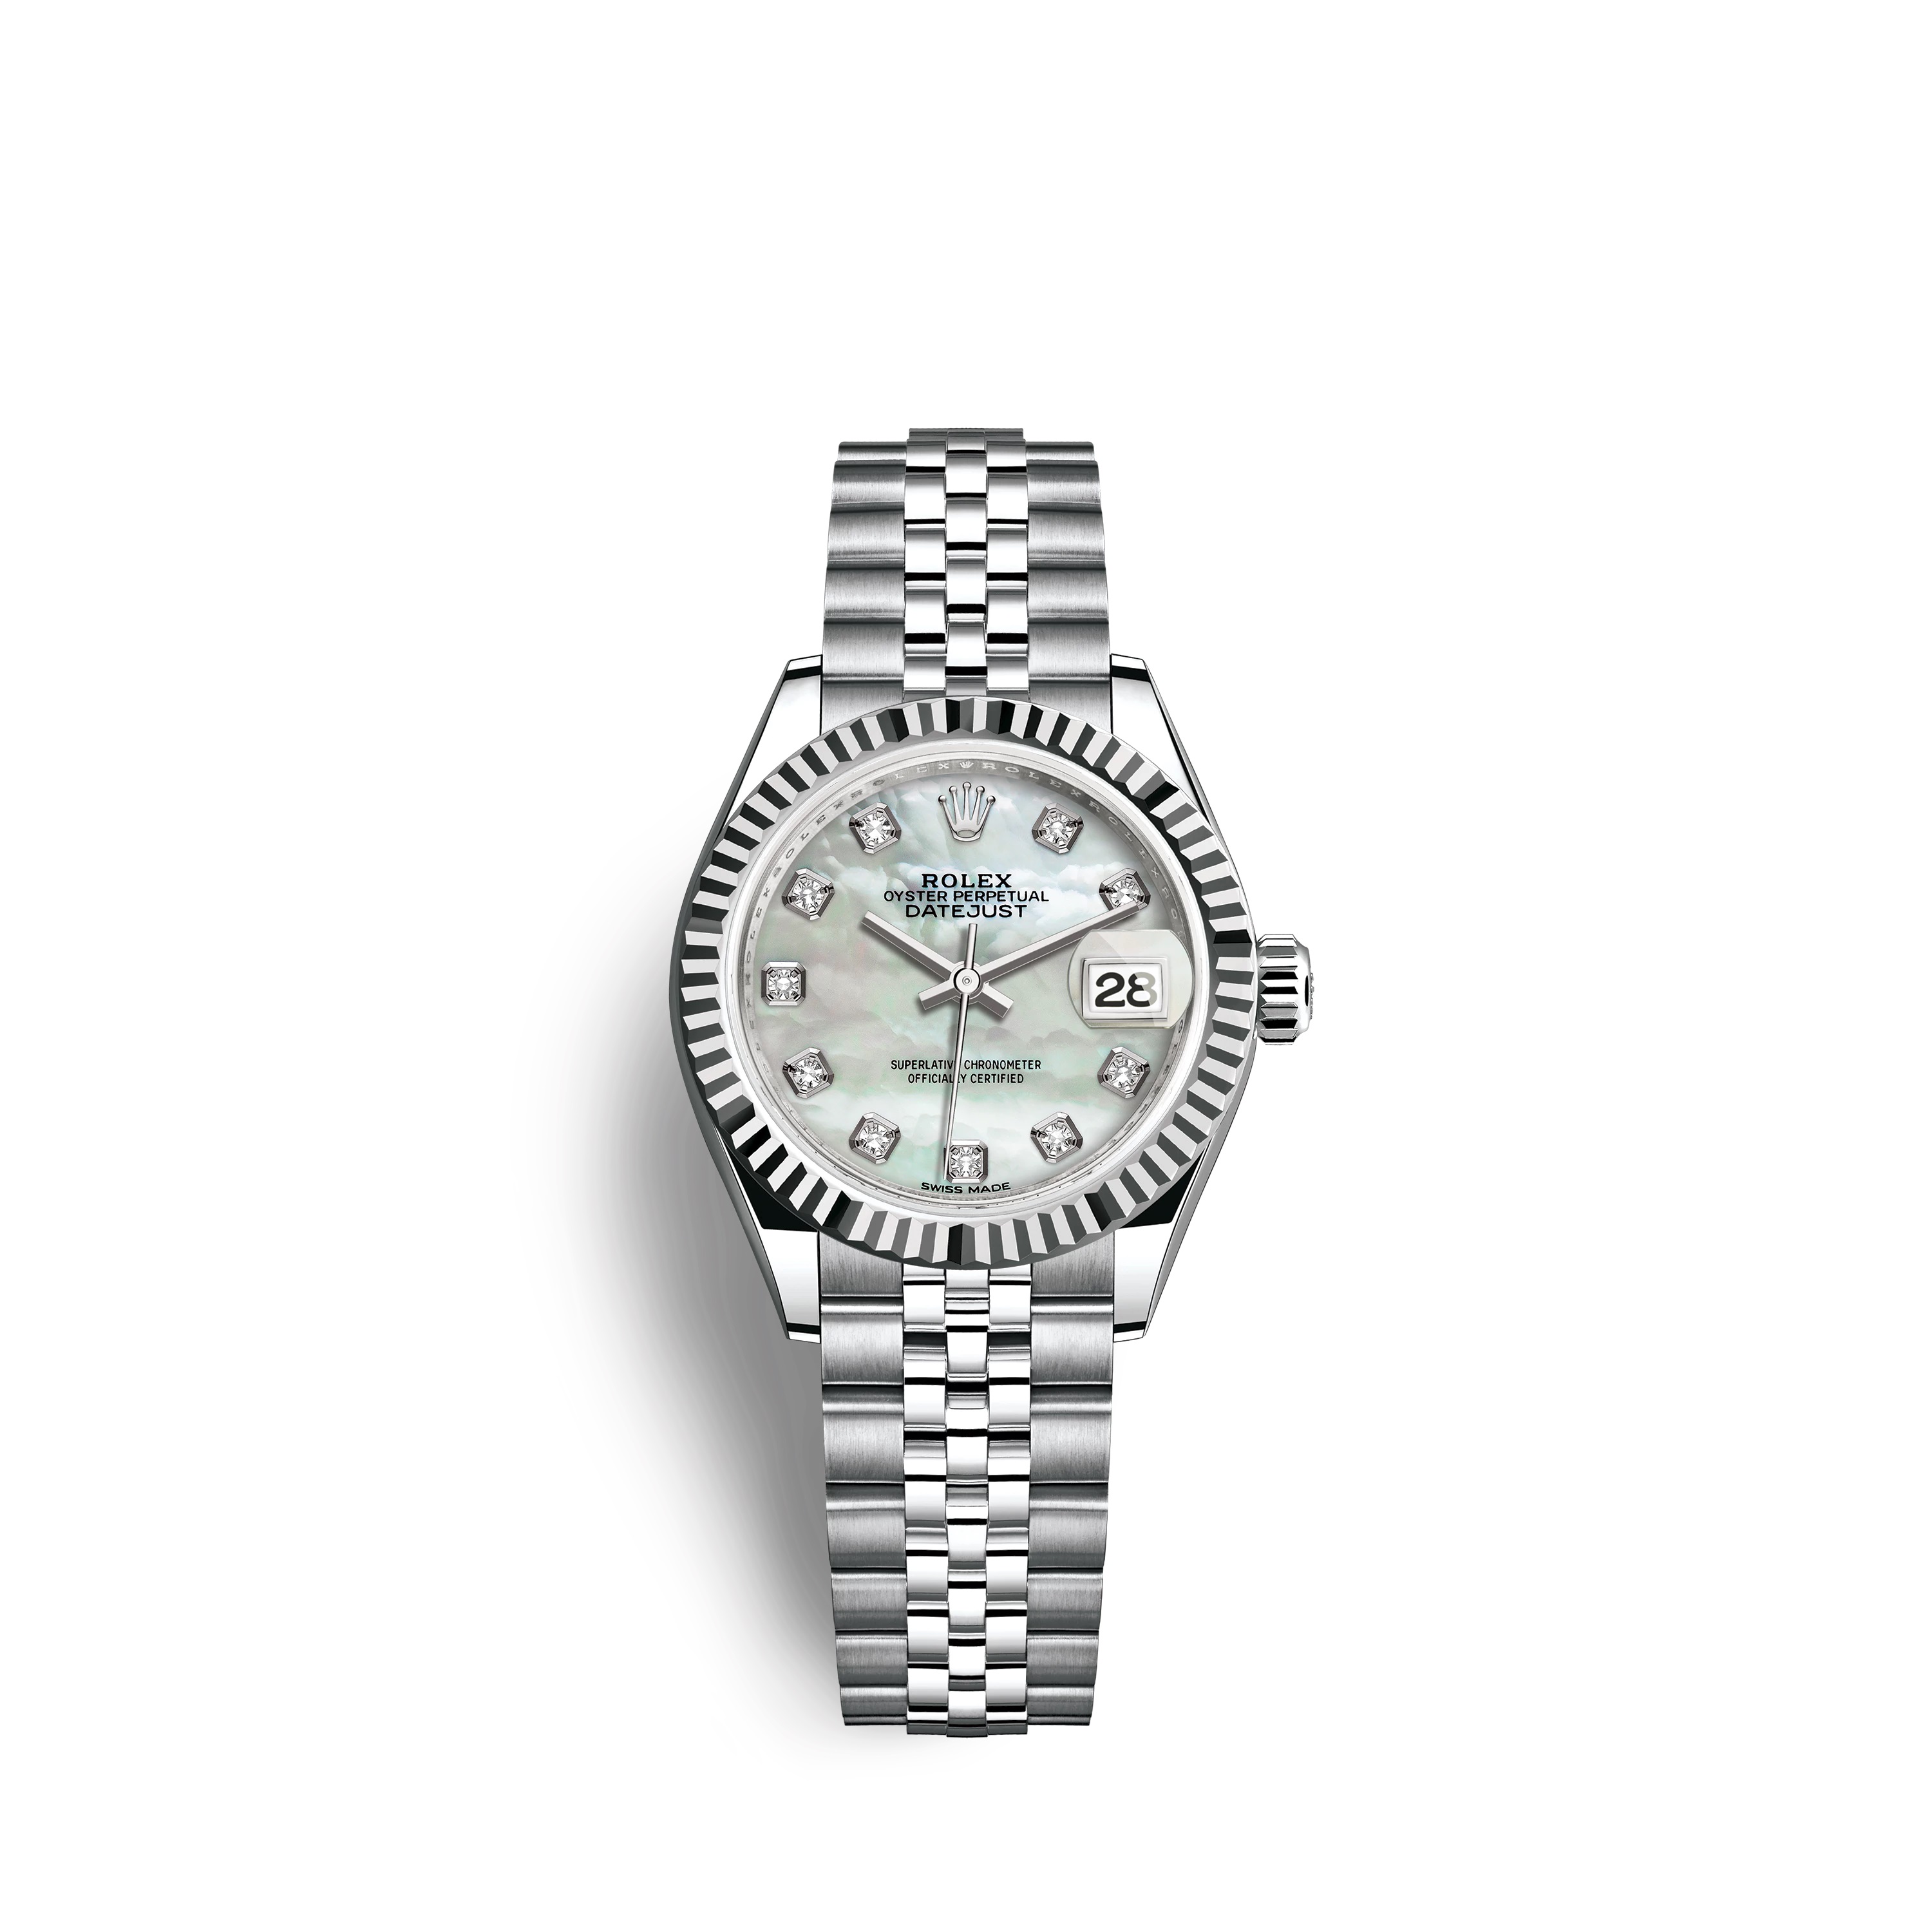 Lady-Datejust 28 279174 White Gold & Stainless Steel Watch (White Mother-of-Pearl Set with Diamonds)